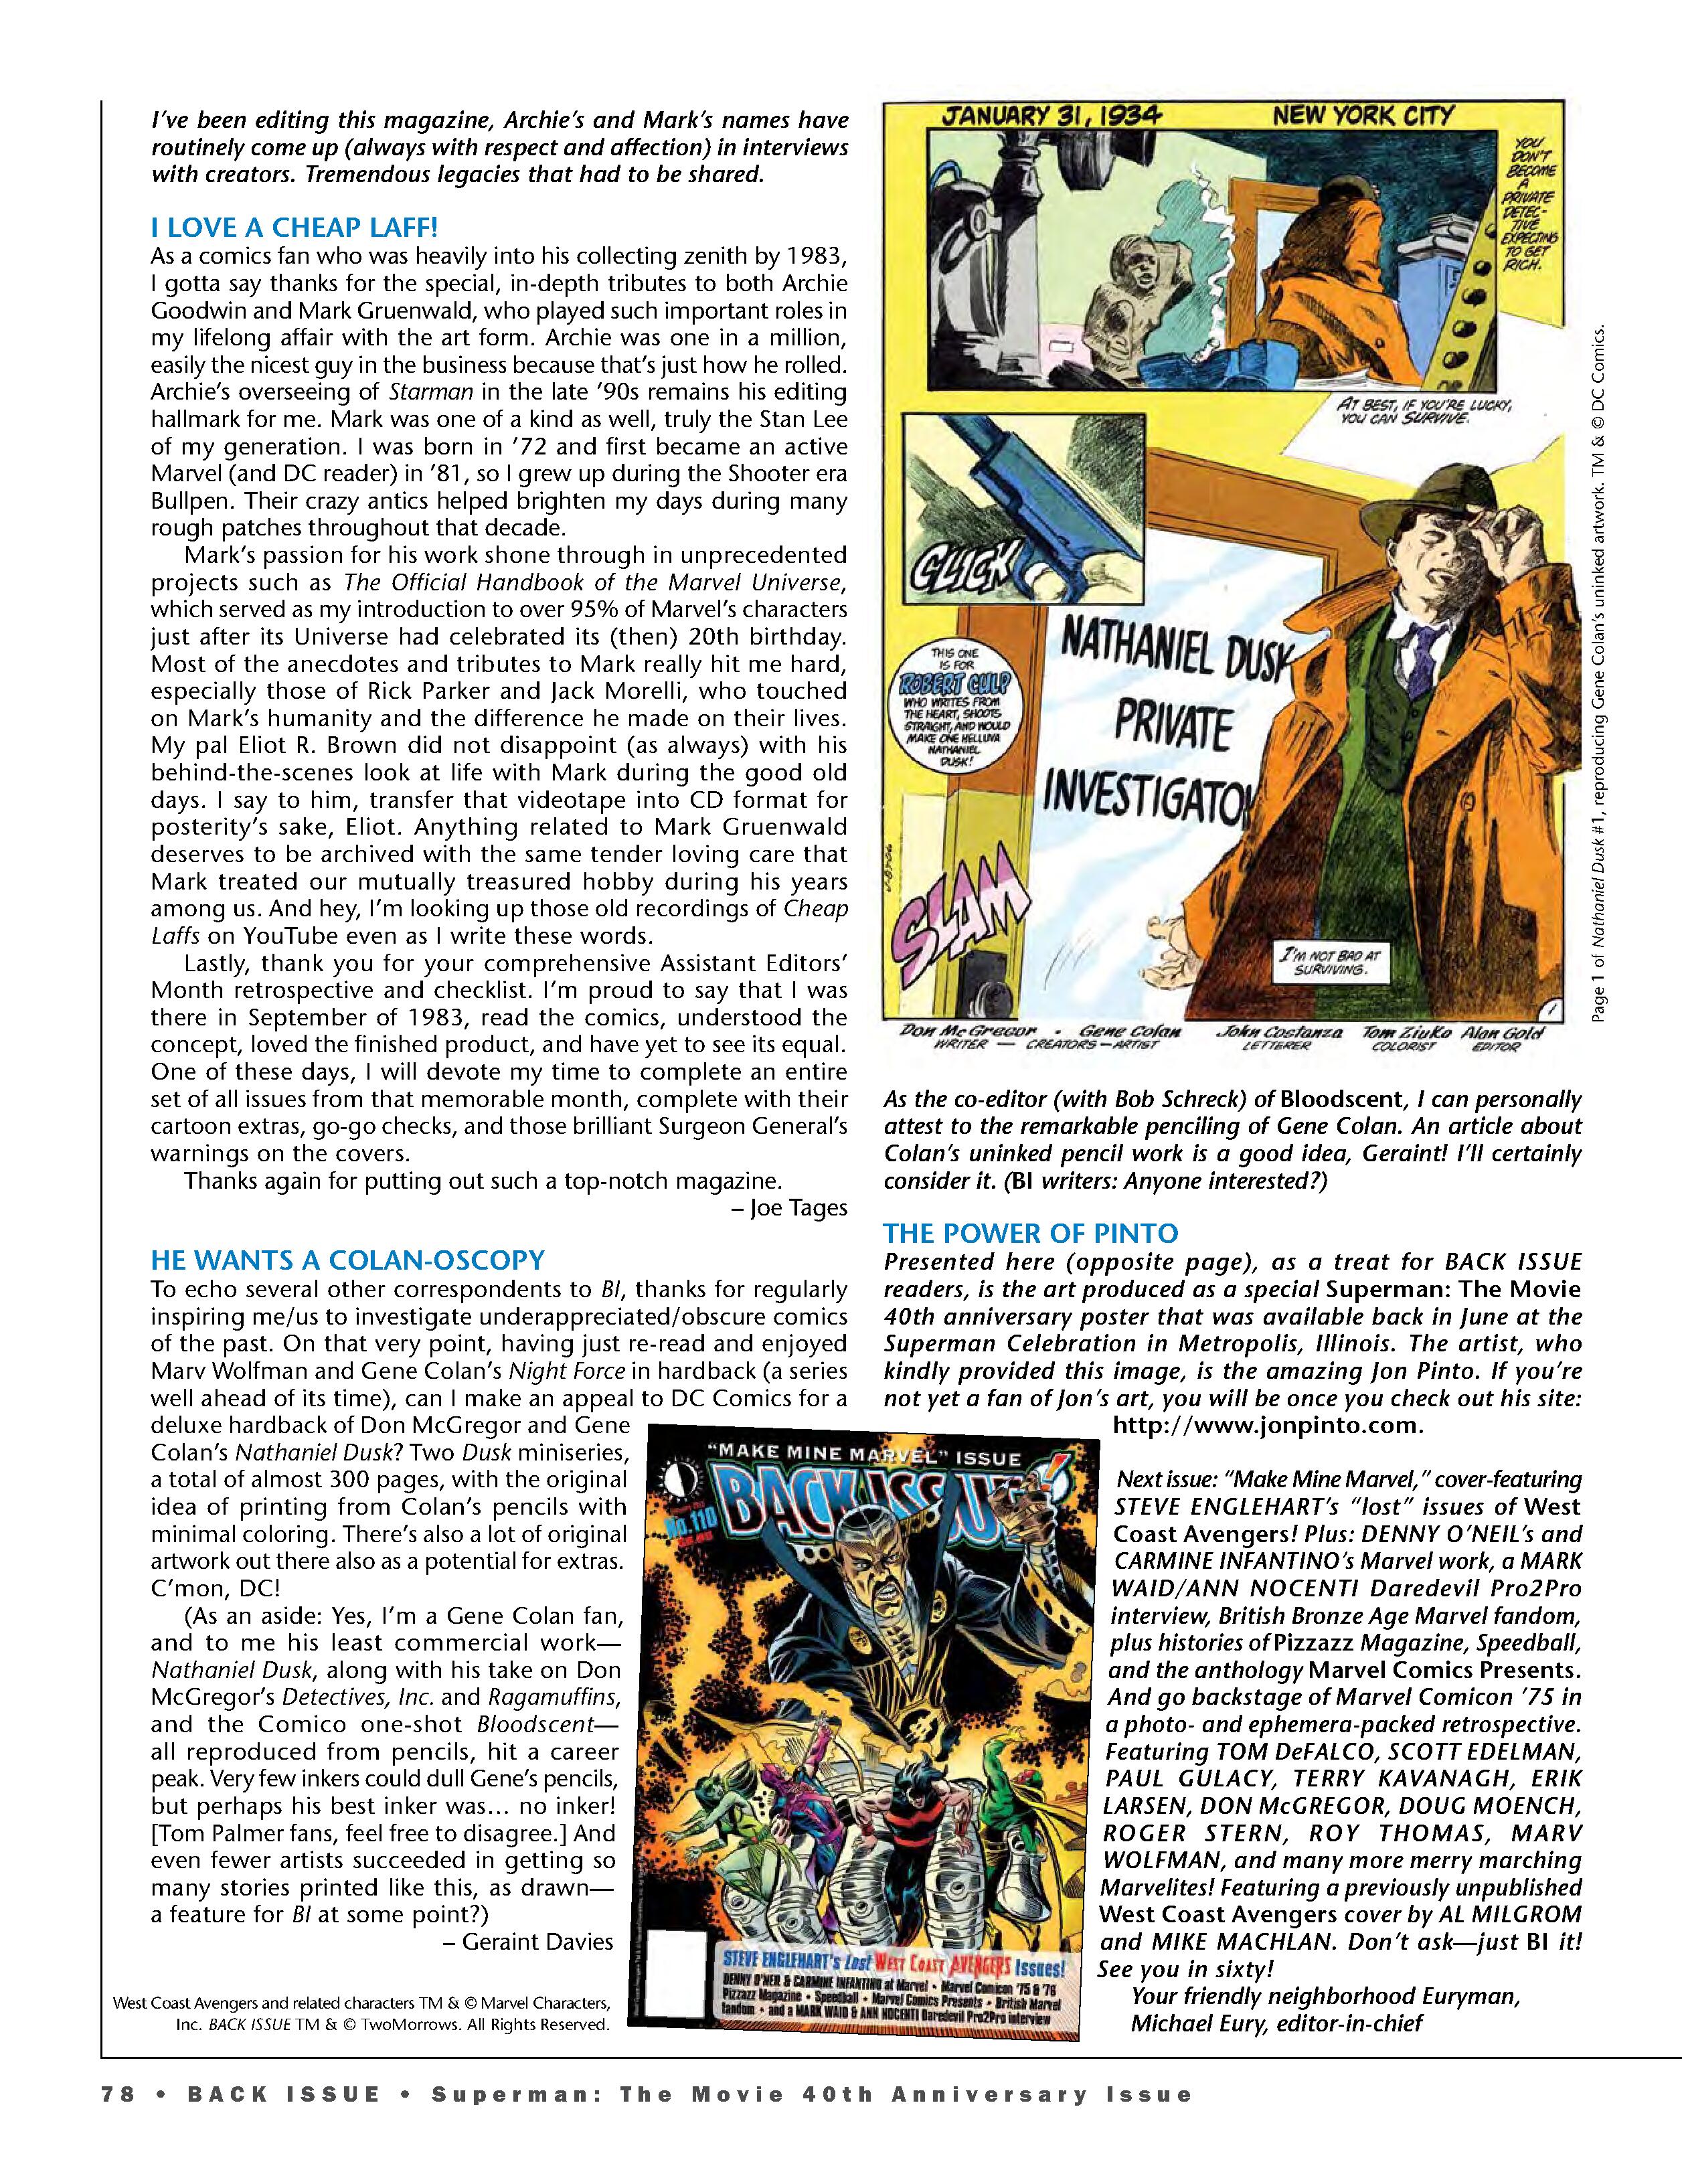 Read online Back Issue comic -  Issue #109 - 80